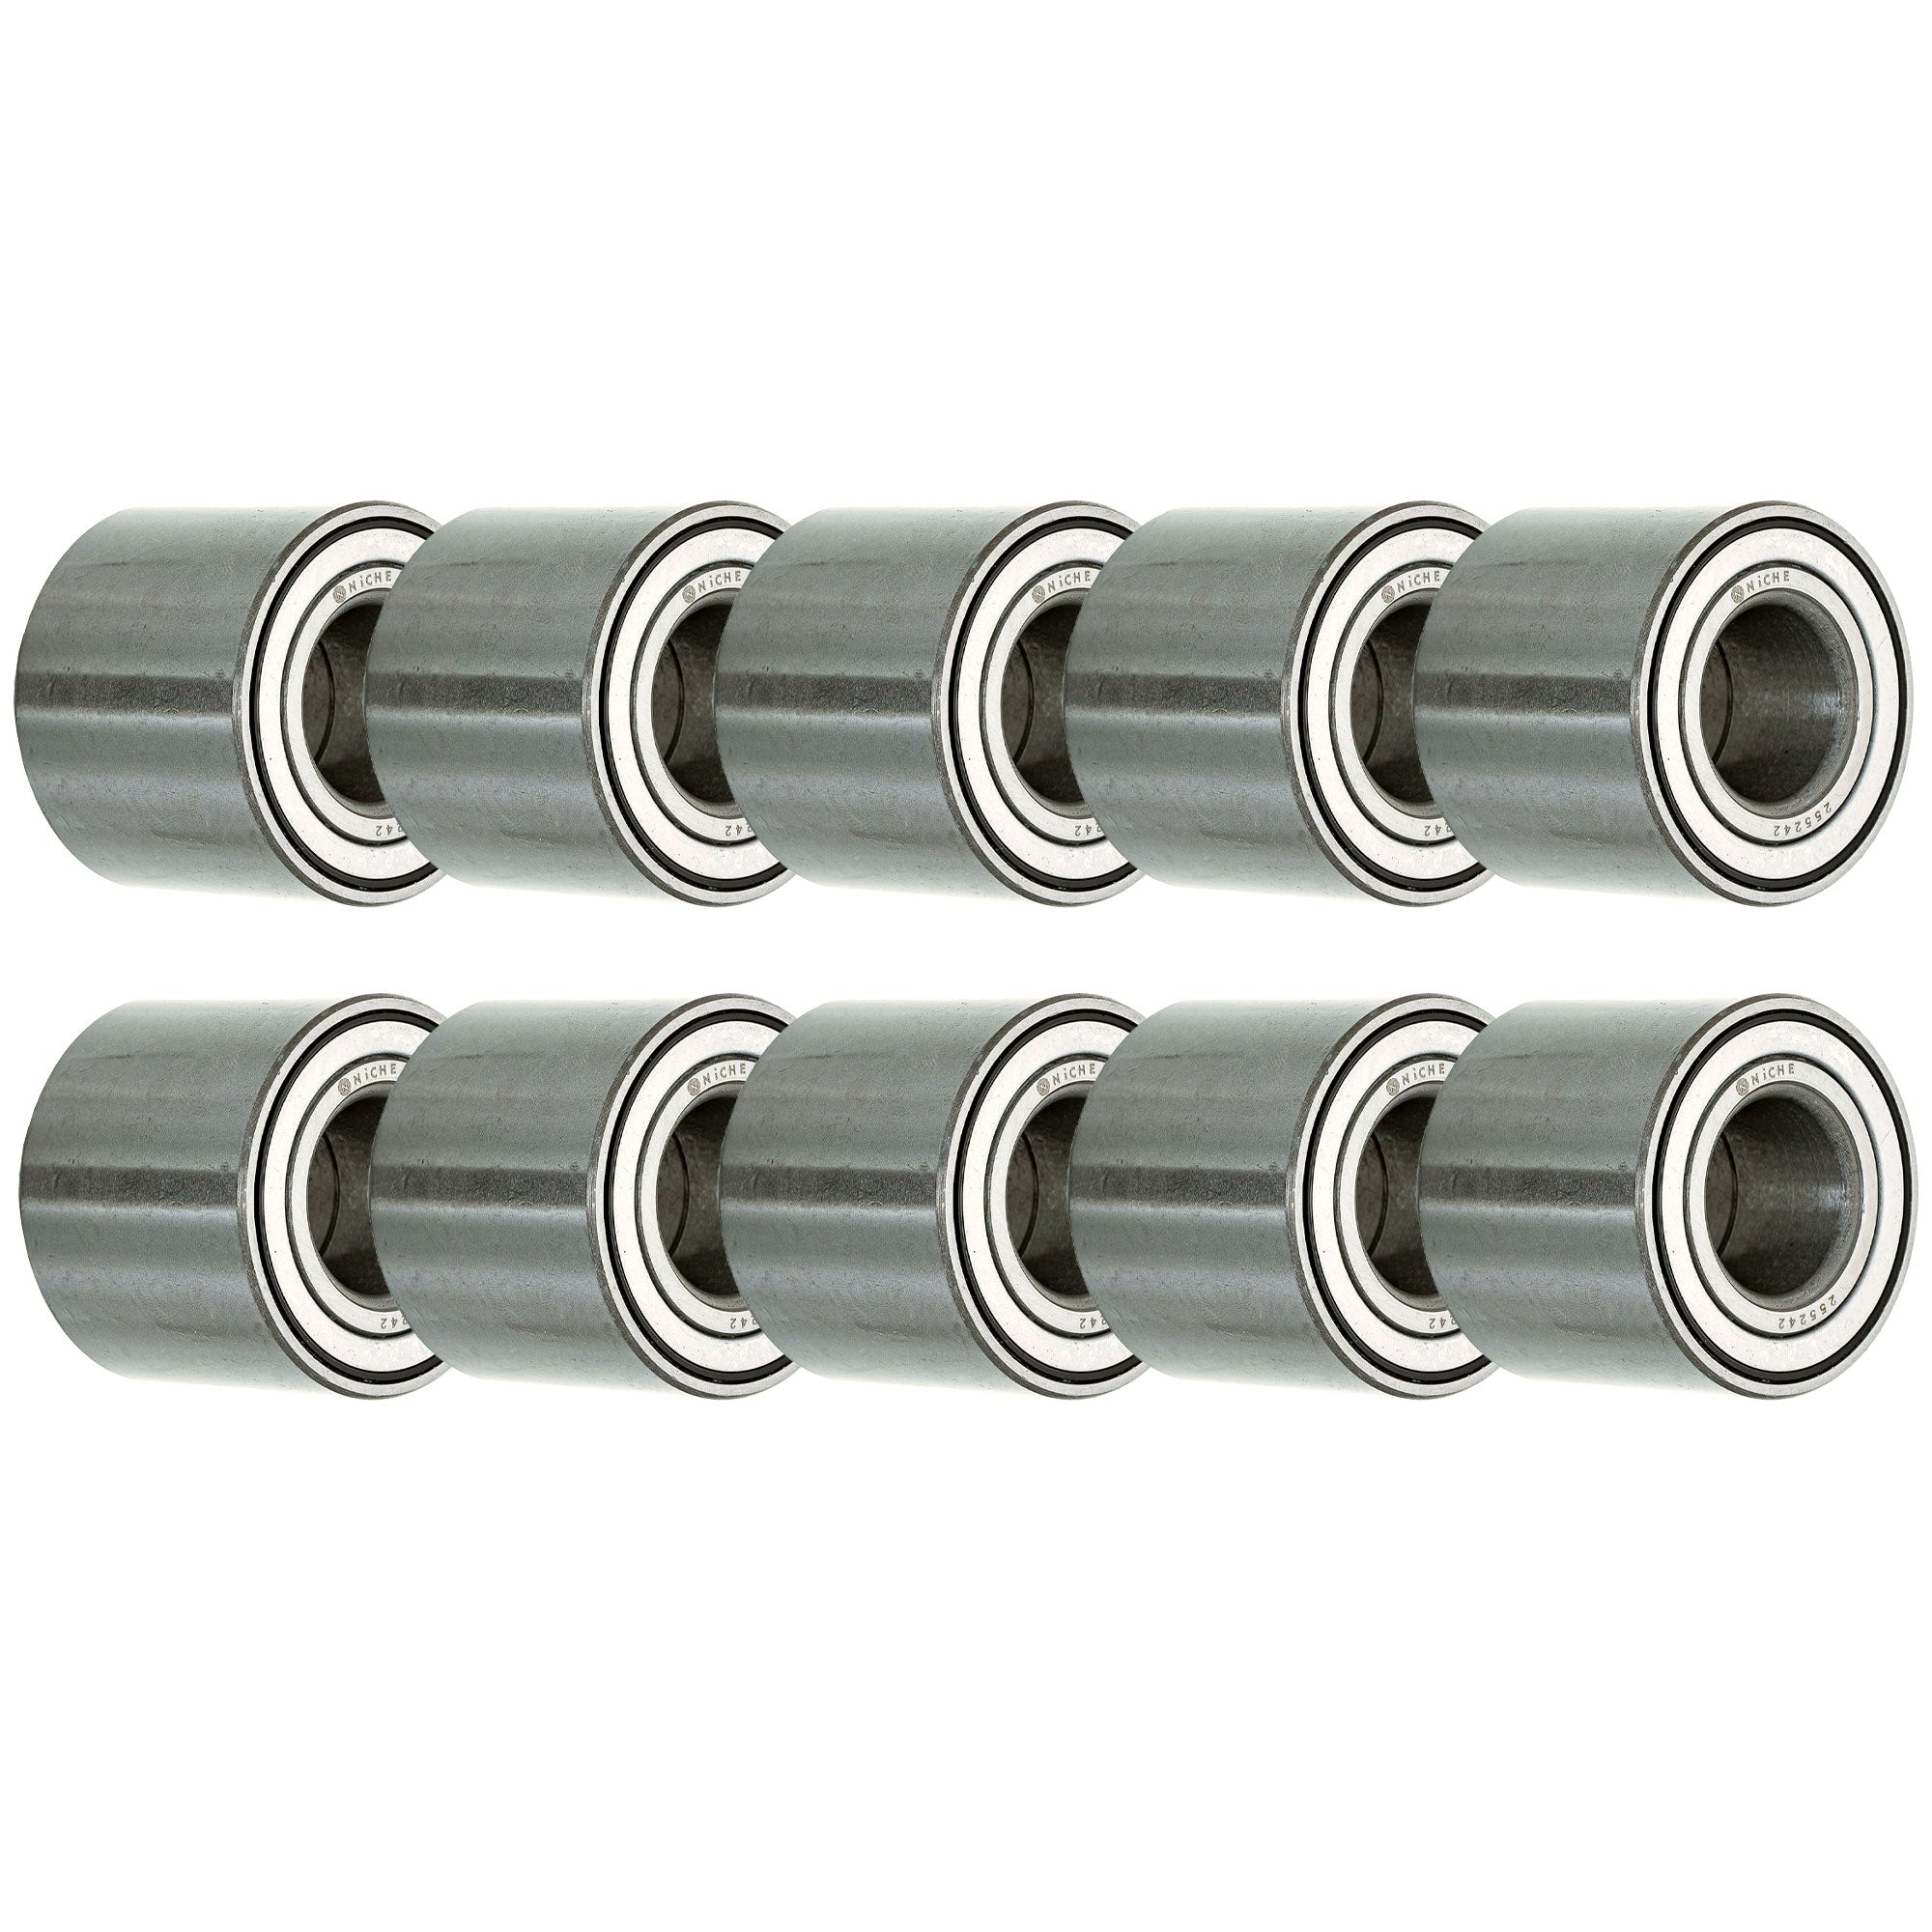 Double Row, Angular Contact, Ball Bearing Pack of 10 10-Pack for zOTHER Teryx Mule Brute NICHE 519-CBB2206R